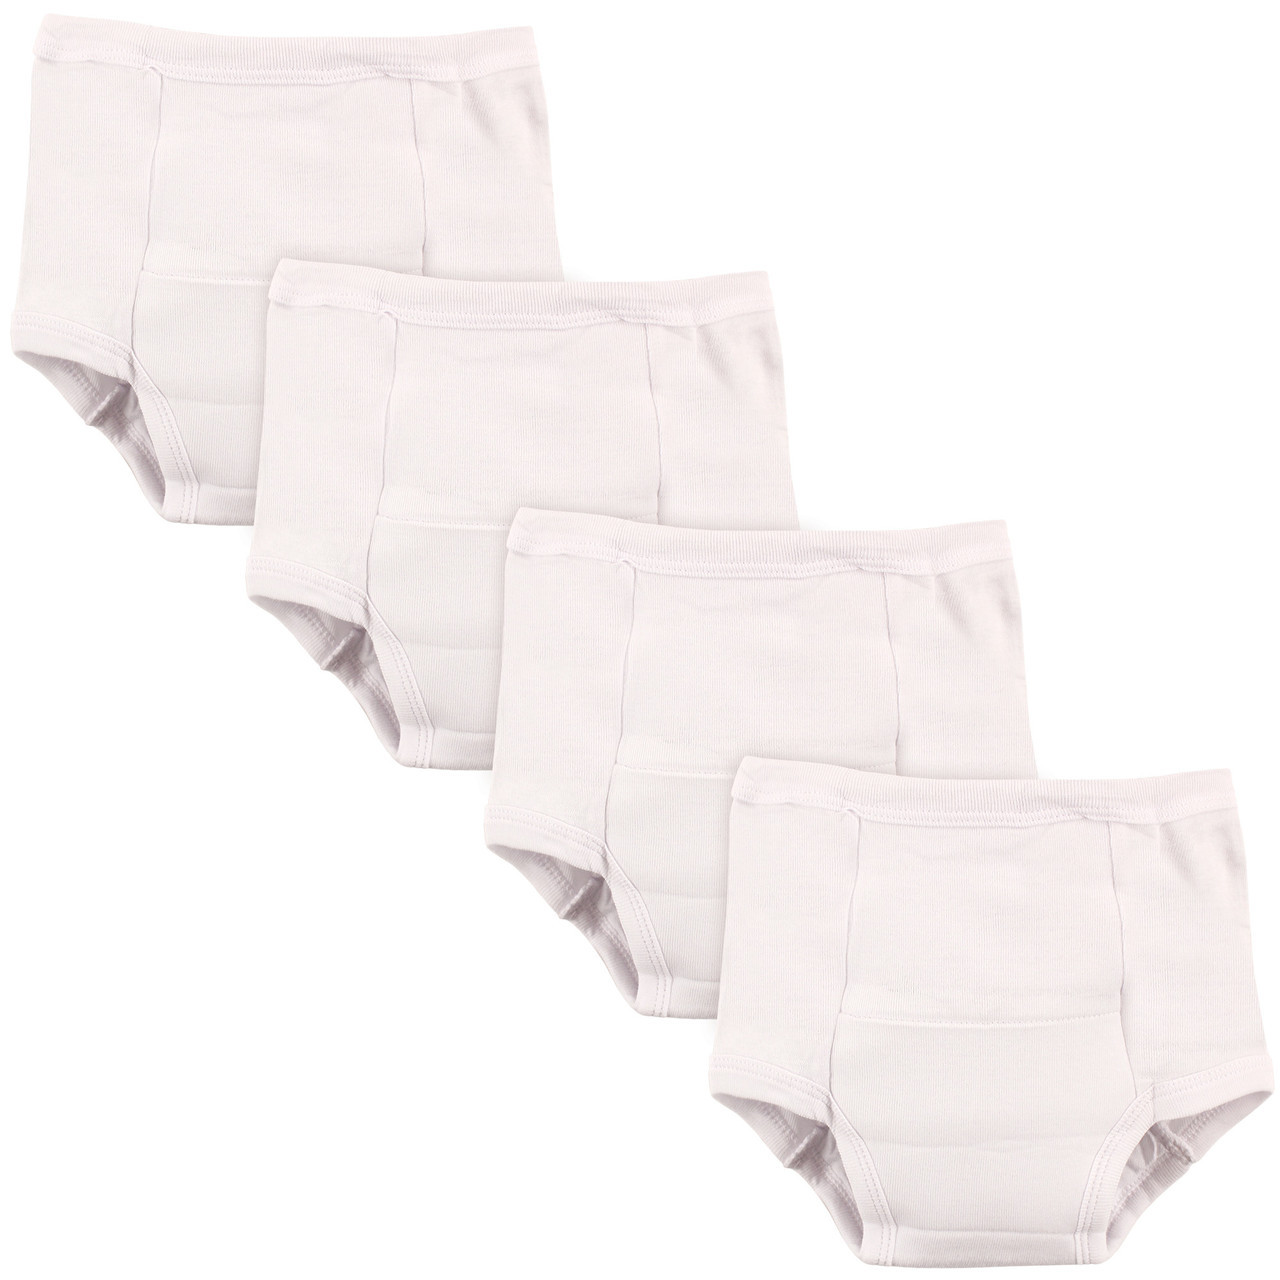 Luvable Friends Toddler Water Resistant Training Pants, 4-Pack, White ...